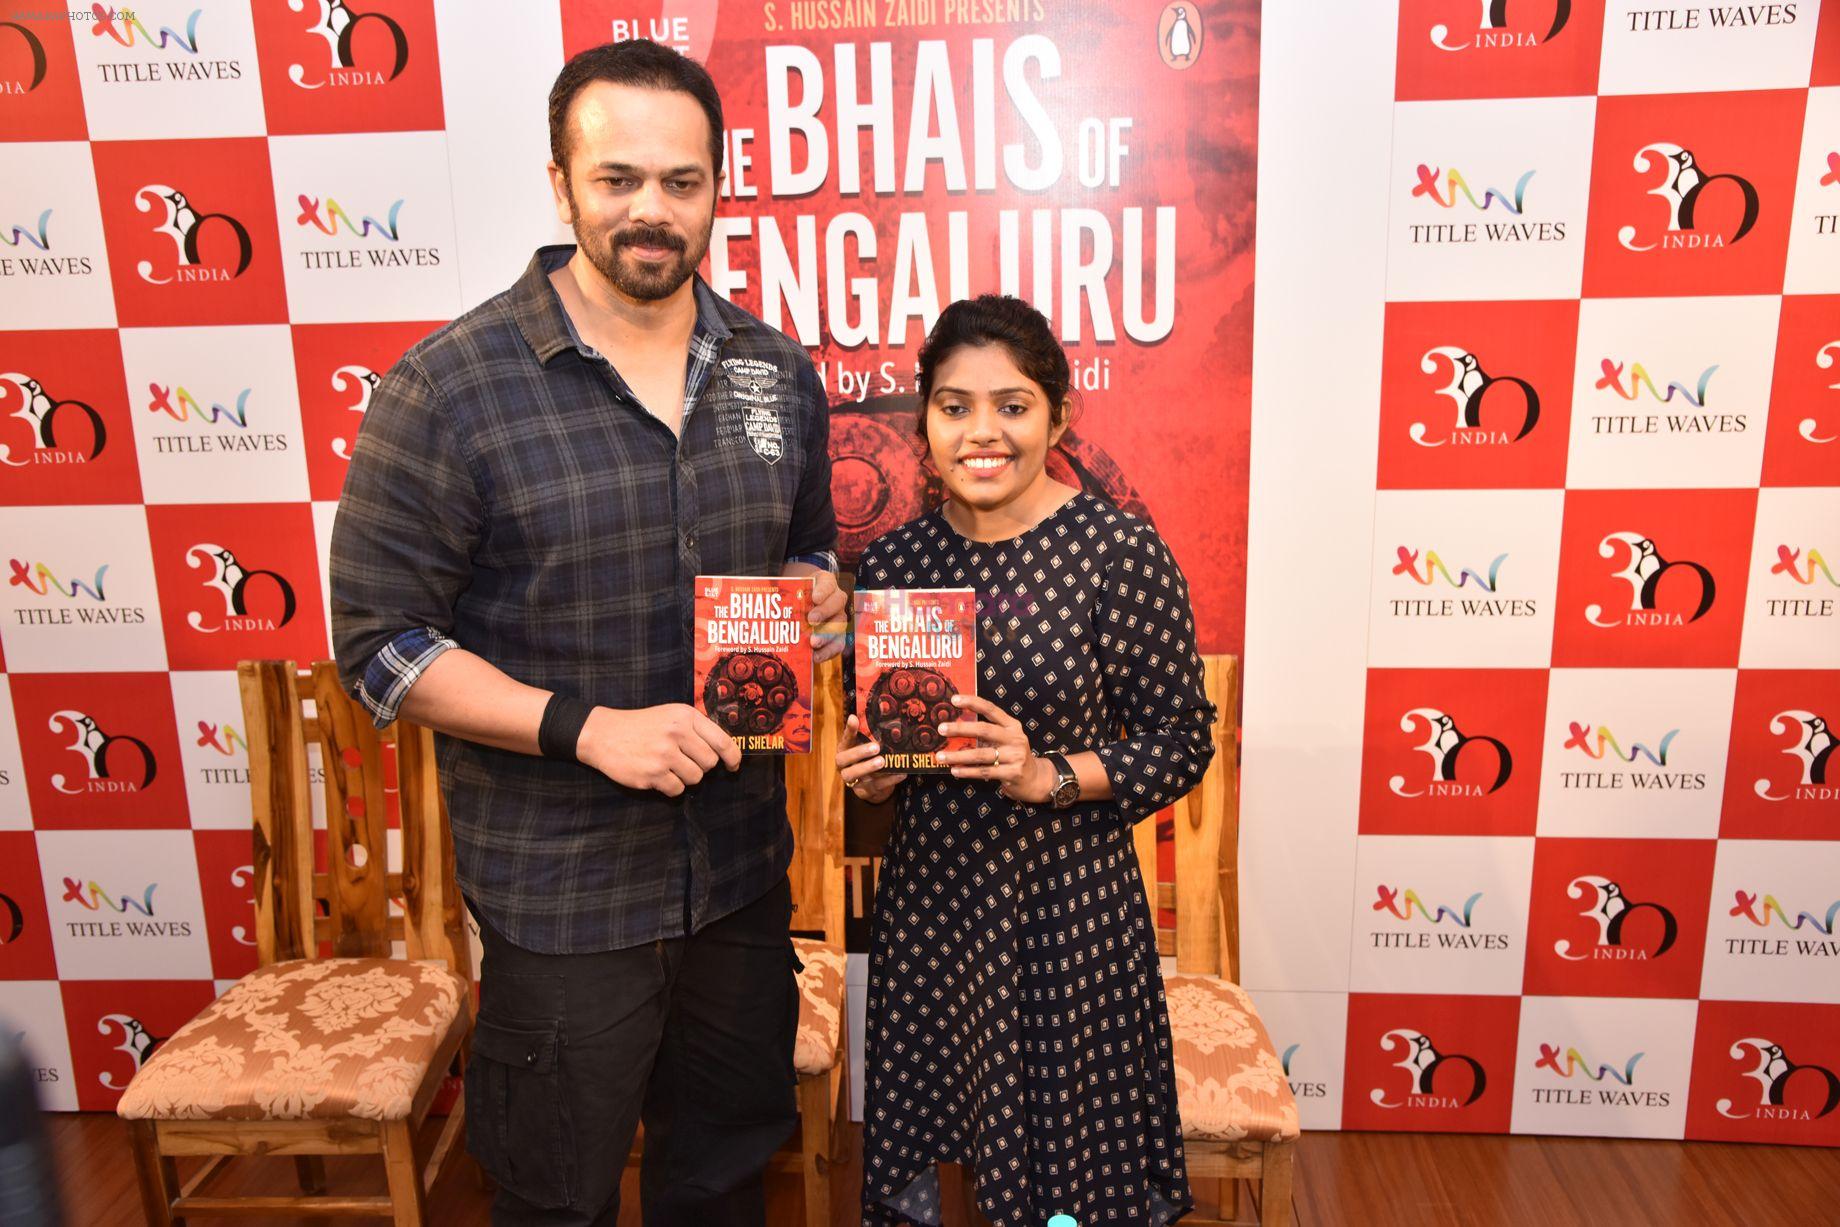 Rohit Shetty at the Book Launch of The Bhais Of Bengaluru on 22nd Dec 2017